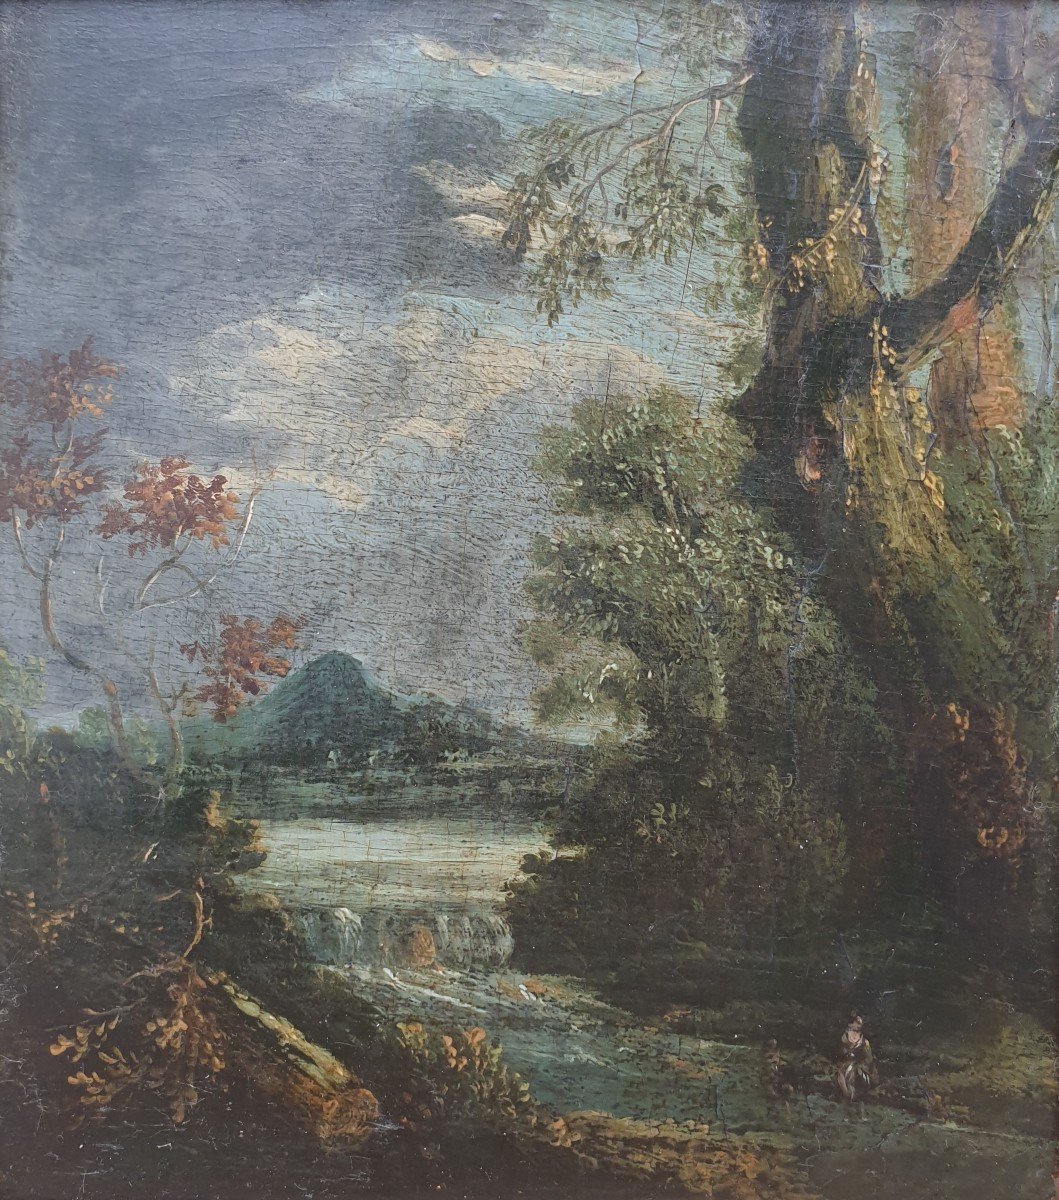 Italian School Of The 17th Century - Landscape At The River-photo-2